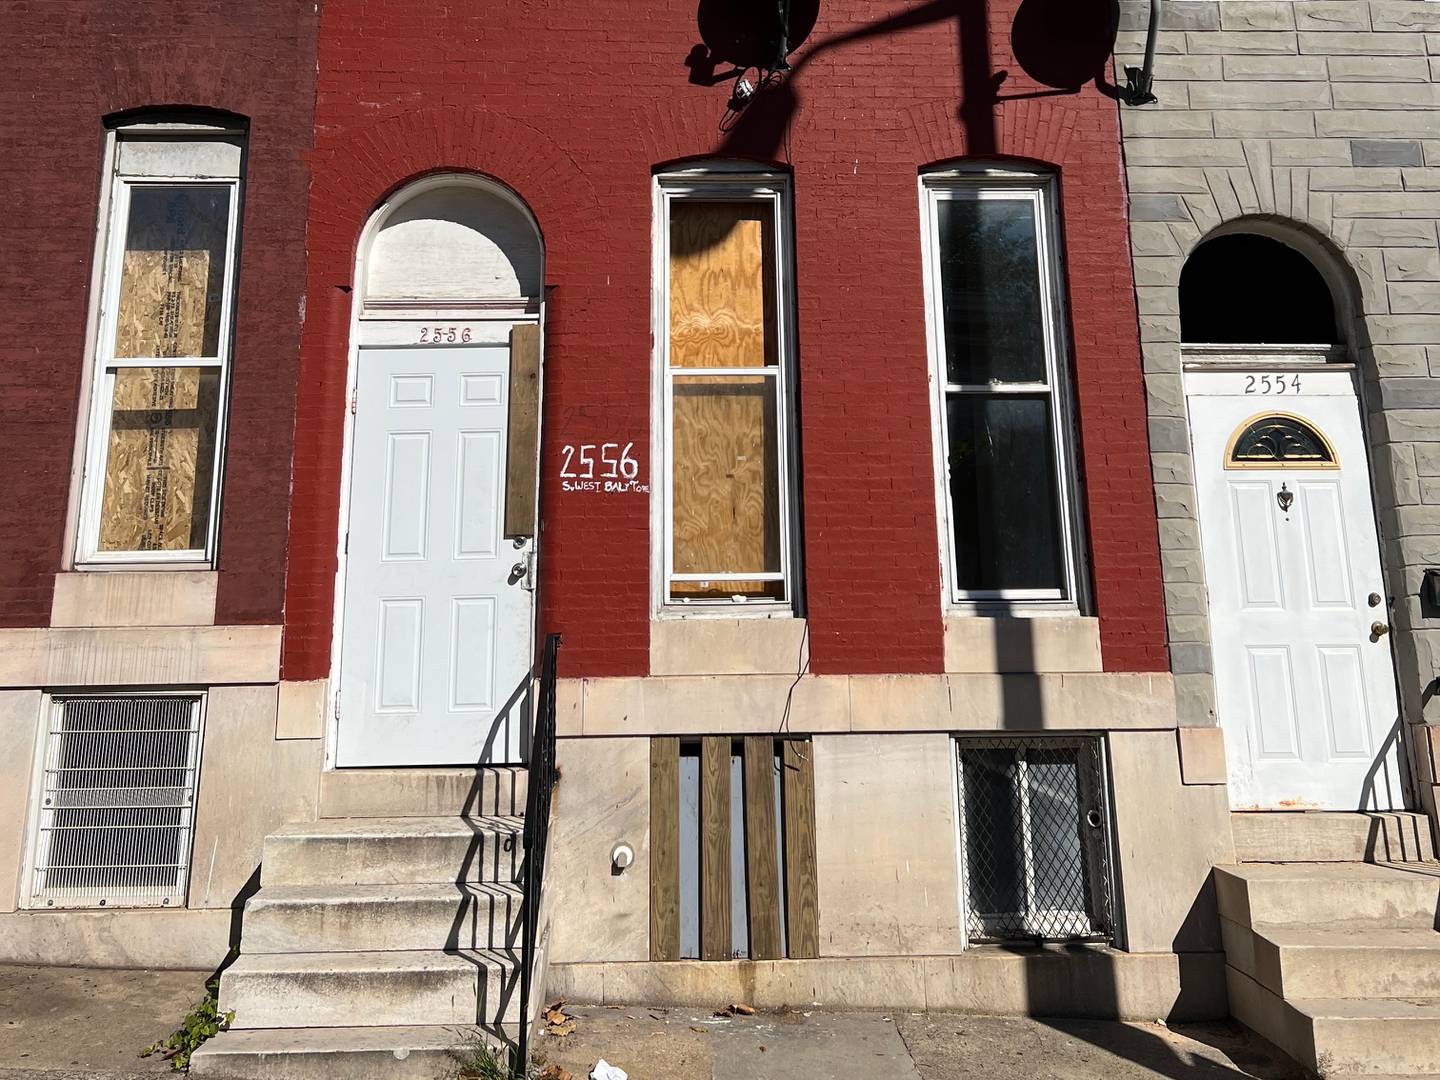 A house at 2556 W. Baltimore St., one of 18 homes bought by Ricardo Oved.